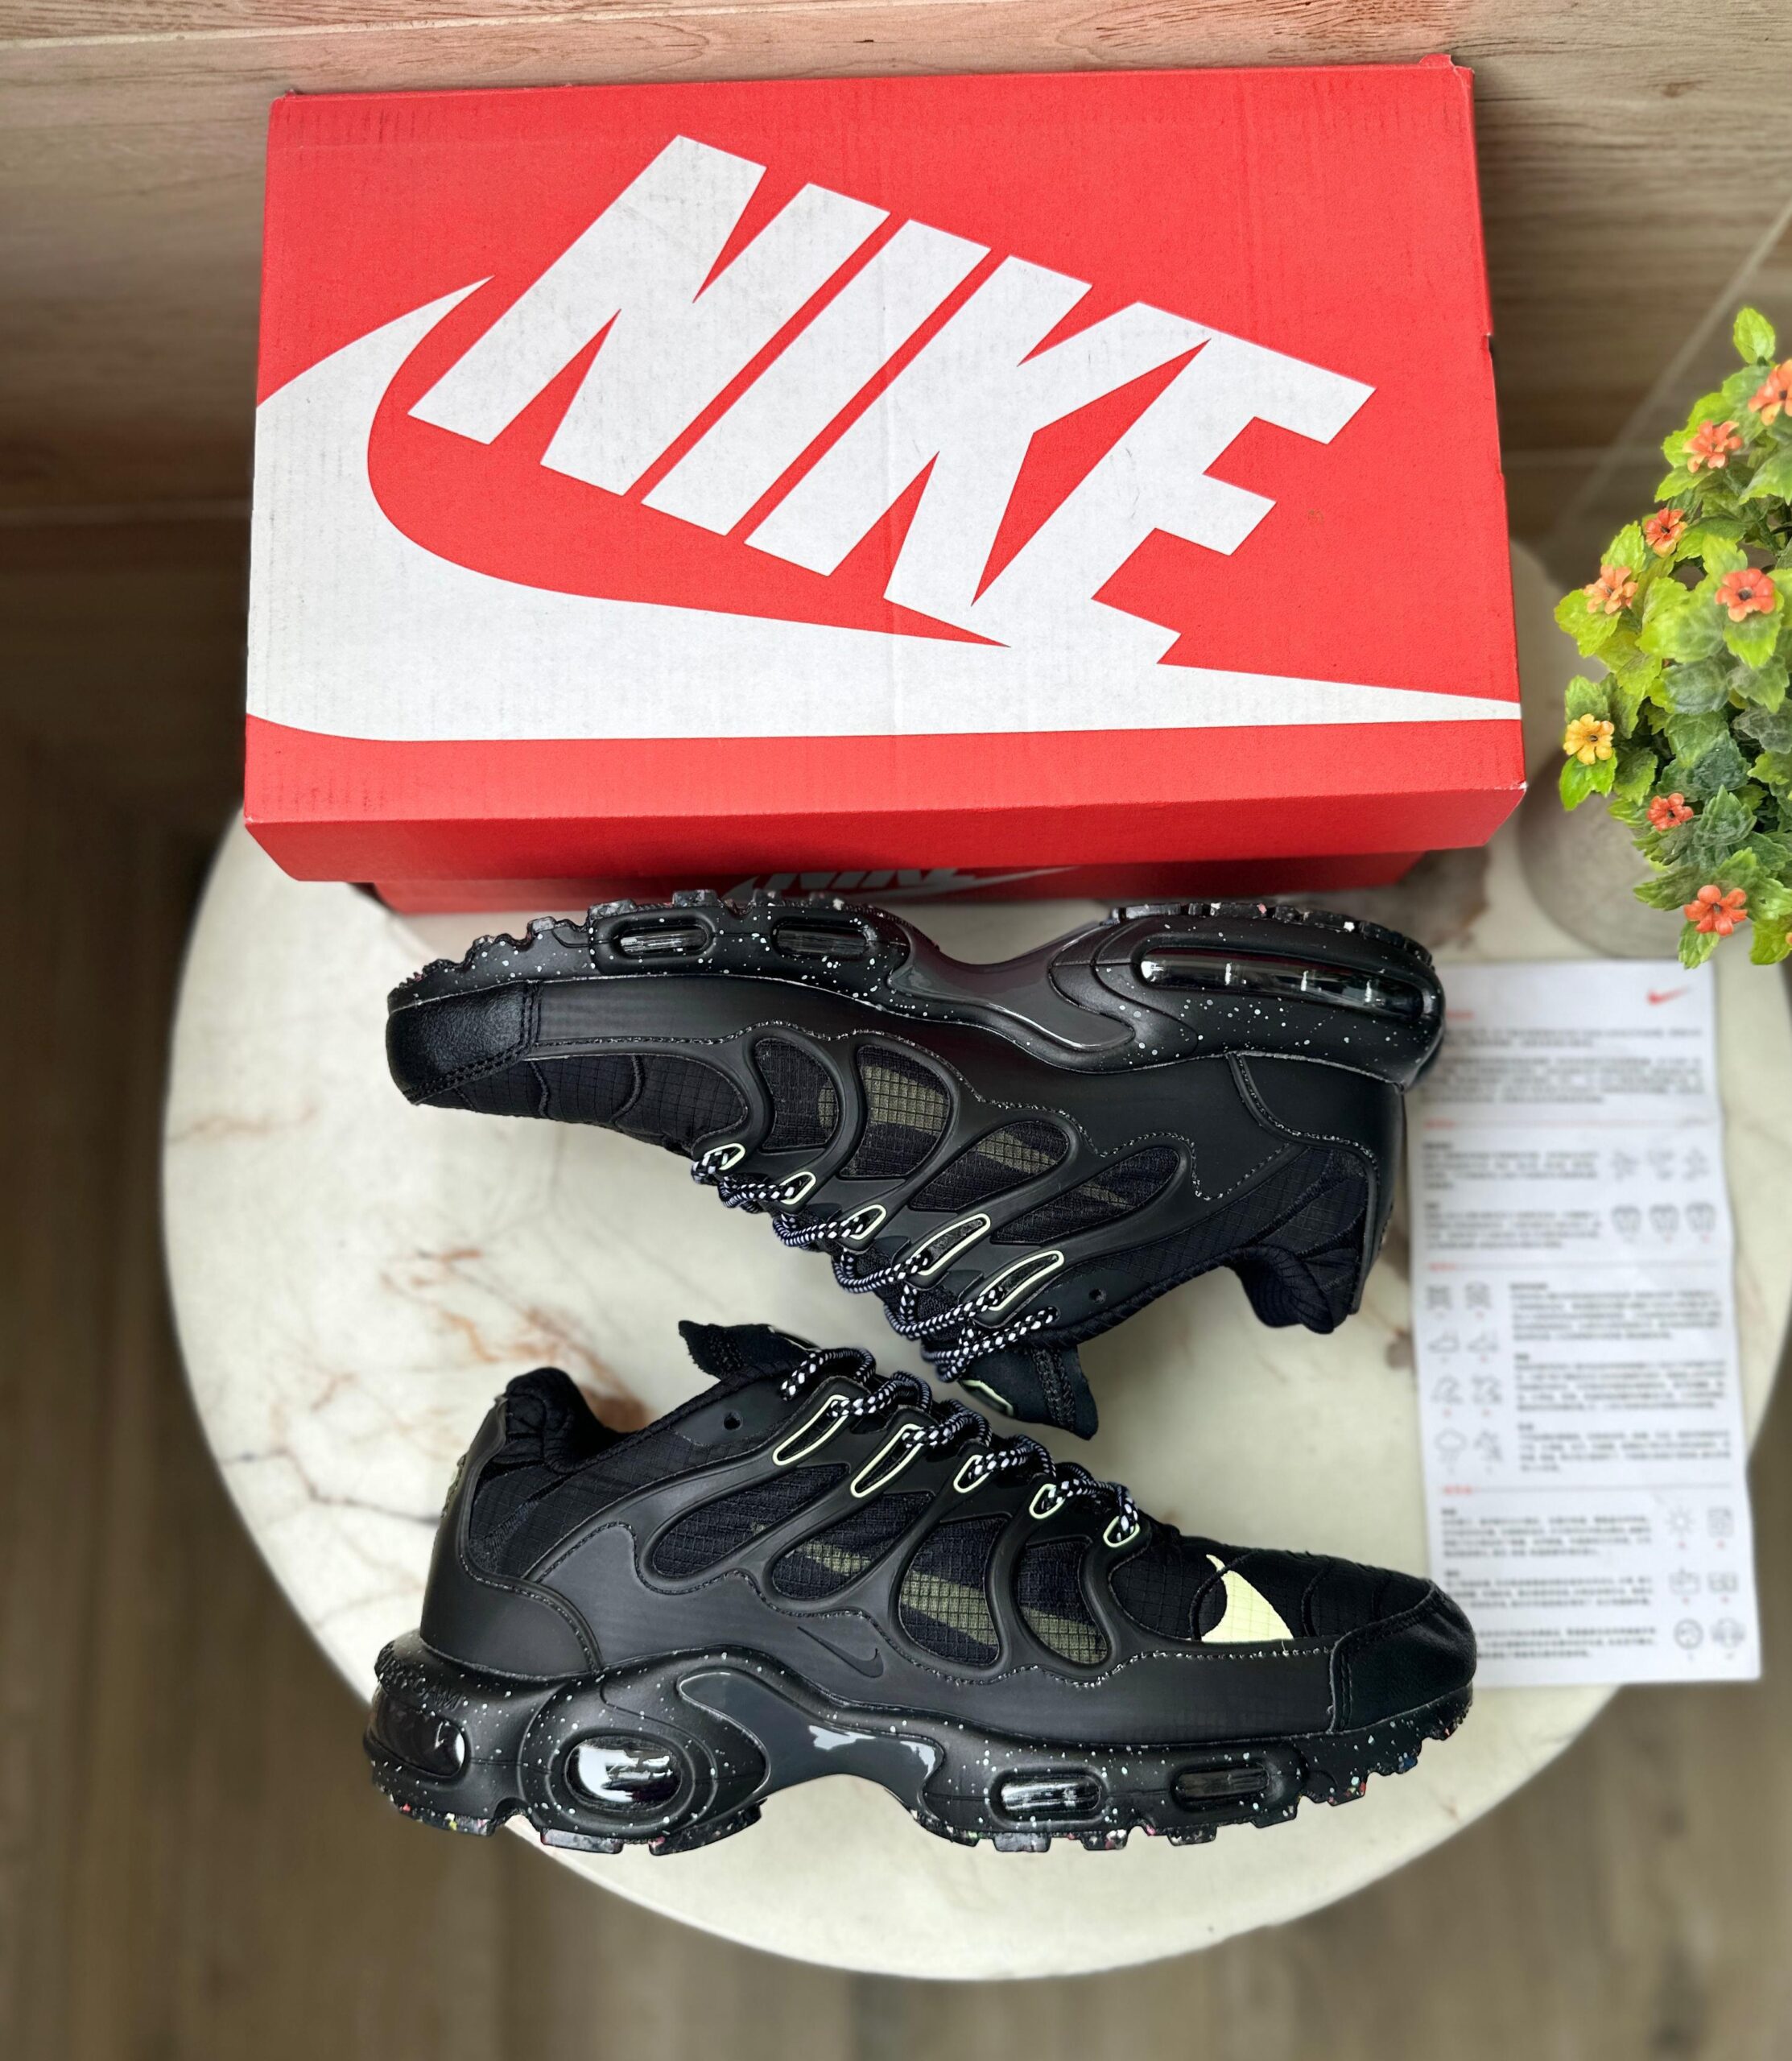 Airmax Plus Terascape Sneakers In Stock